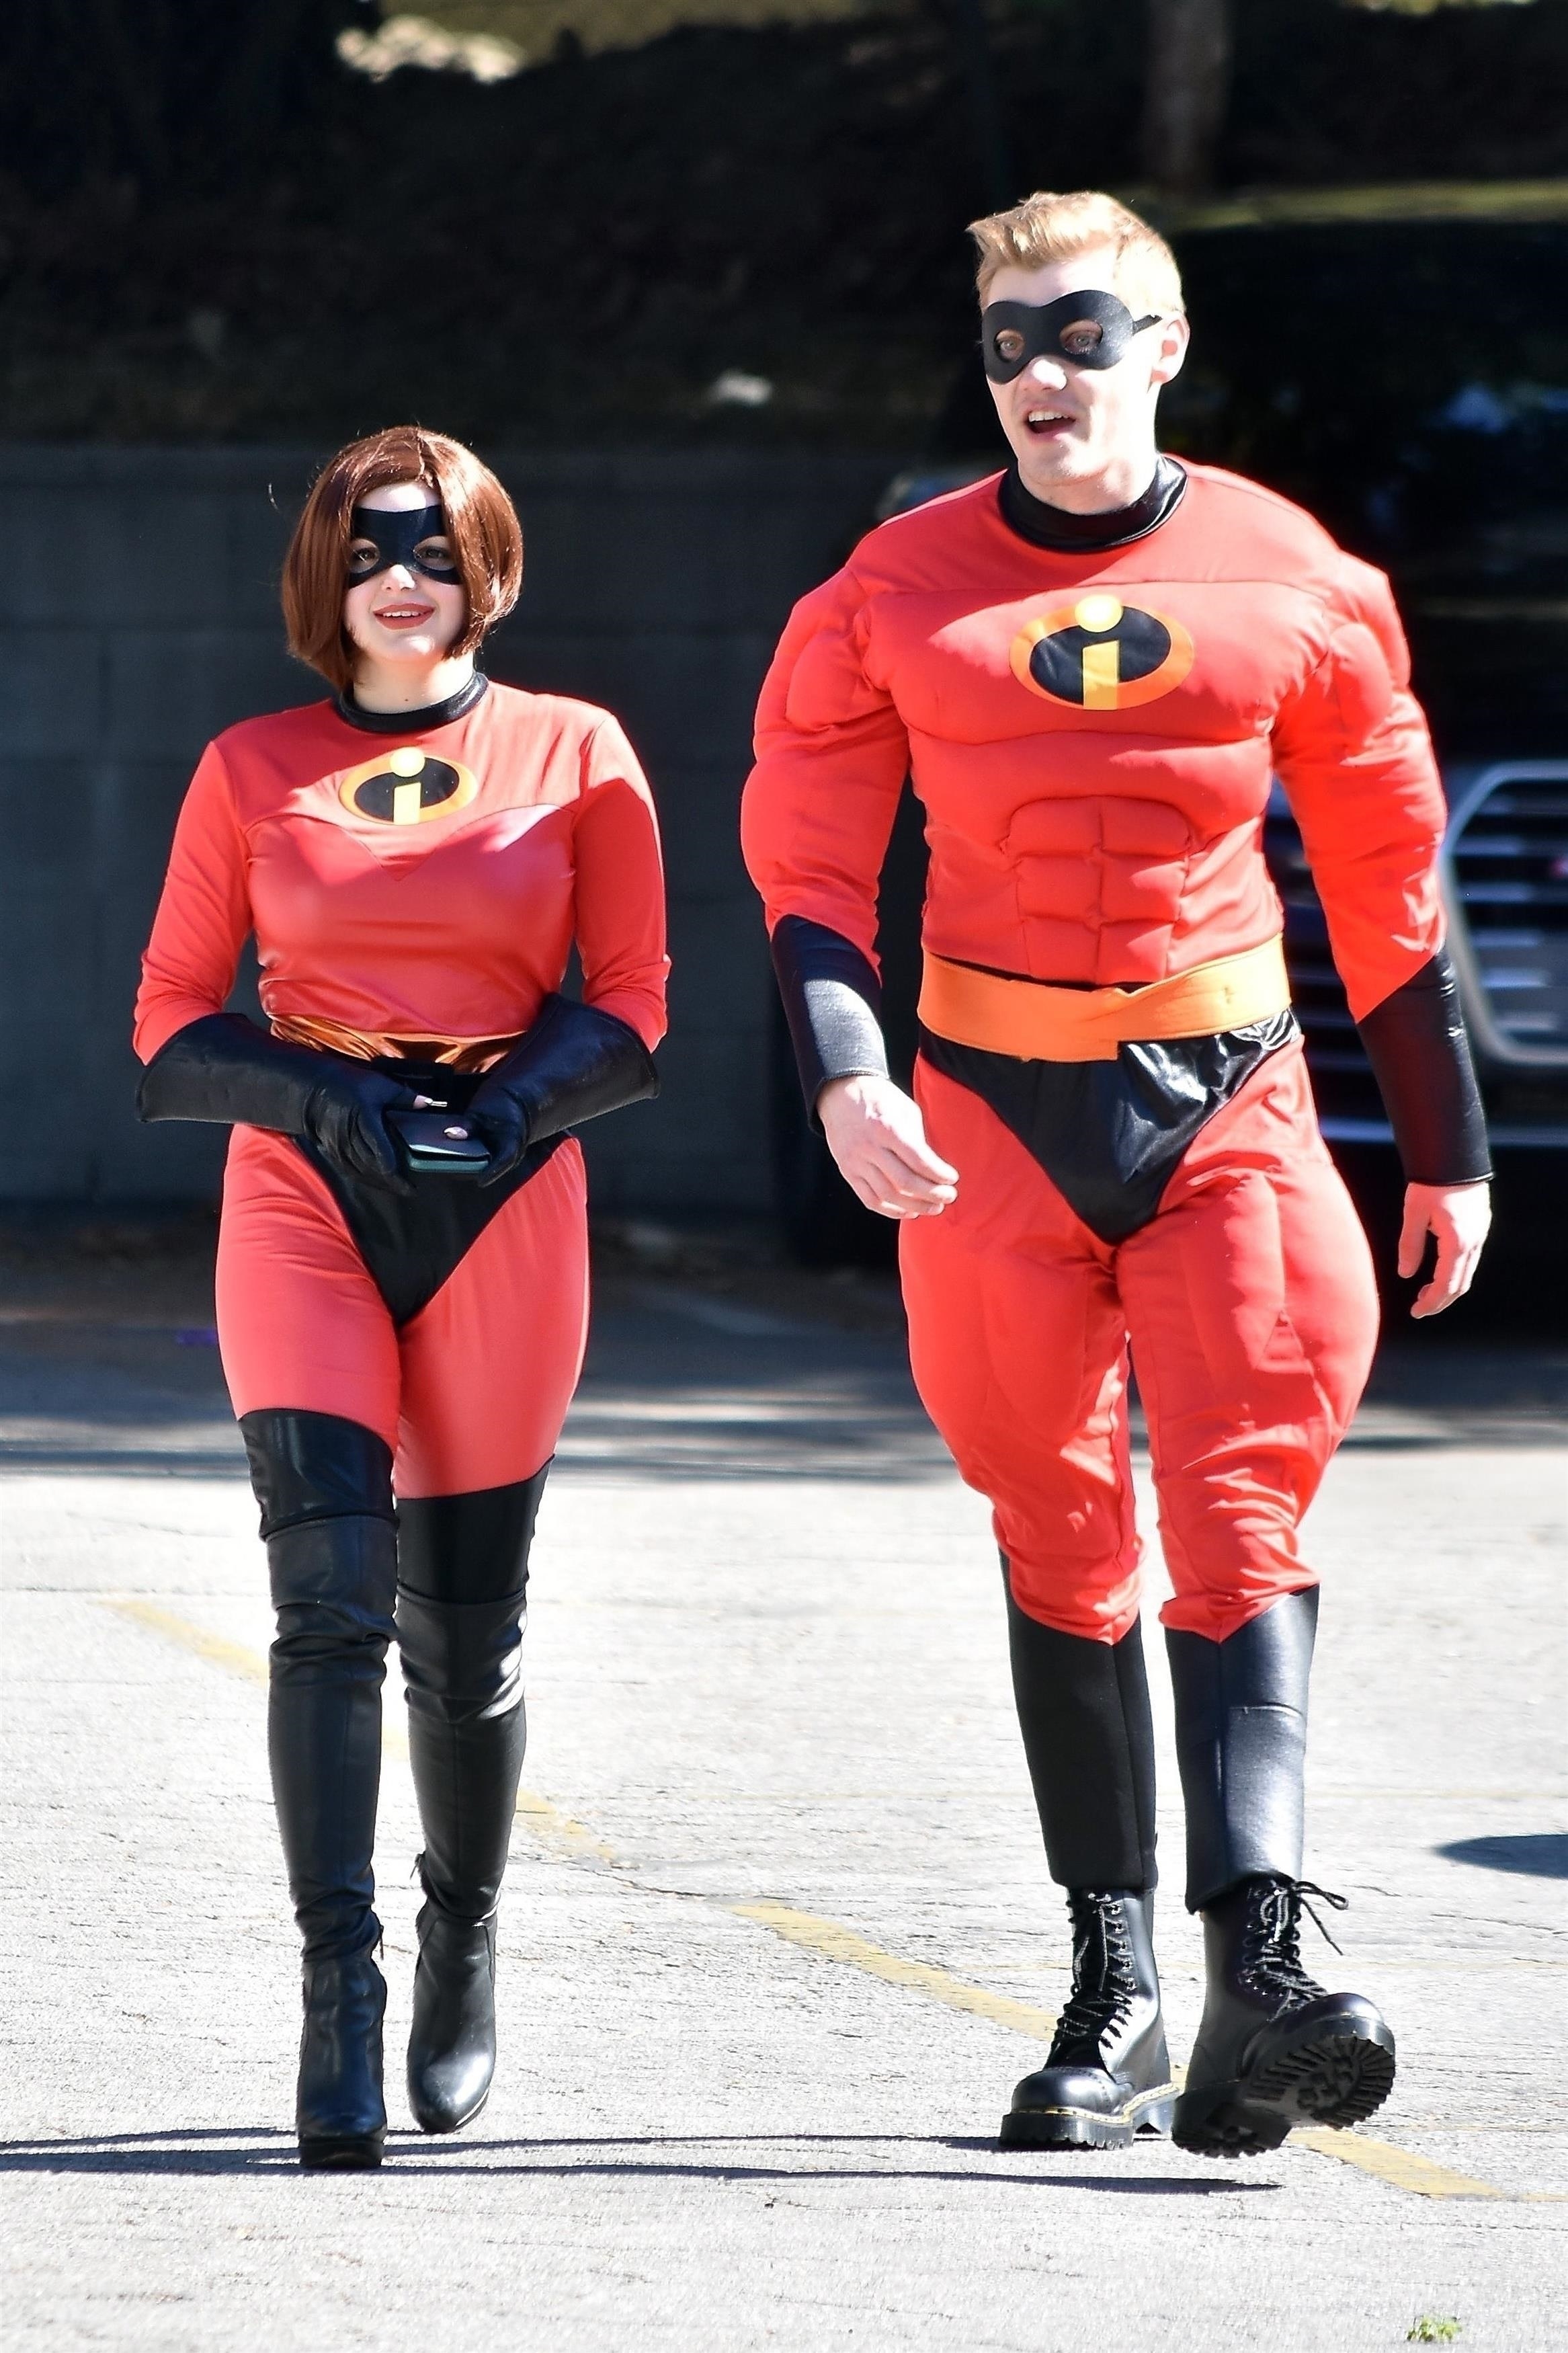 Ariel Winter and Levi Meaden dressed as Mr. and Mrs. Incredible